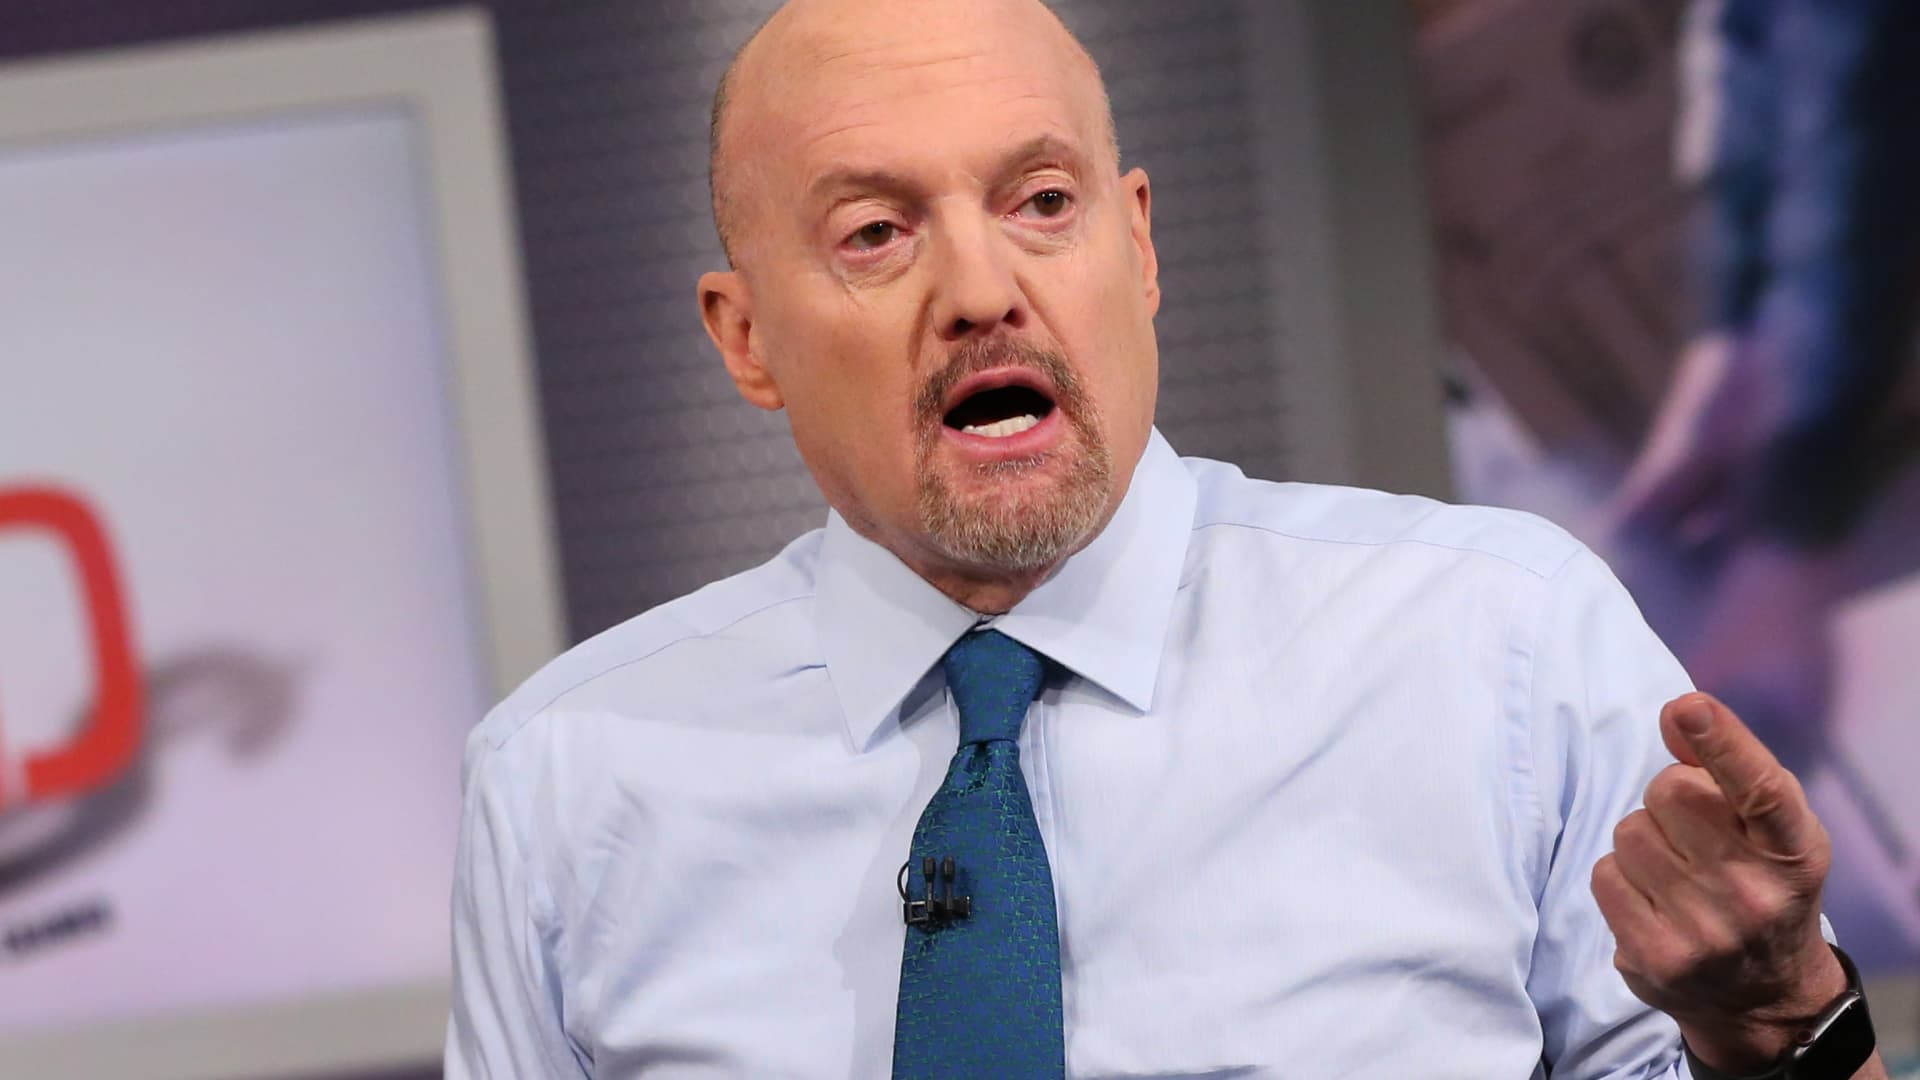 Cramer says get ready to buy if there's a market sell-off: 'I have my shopping list'